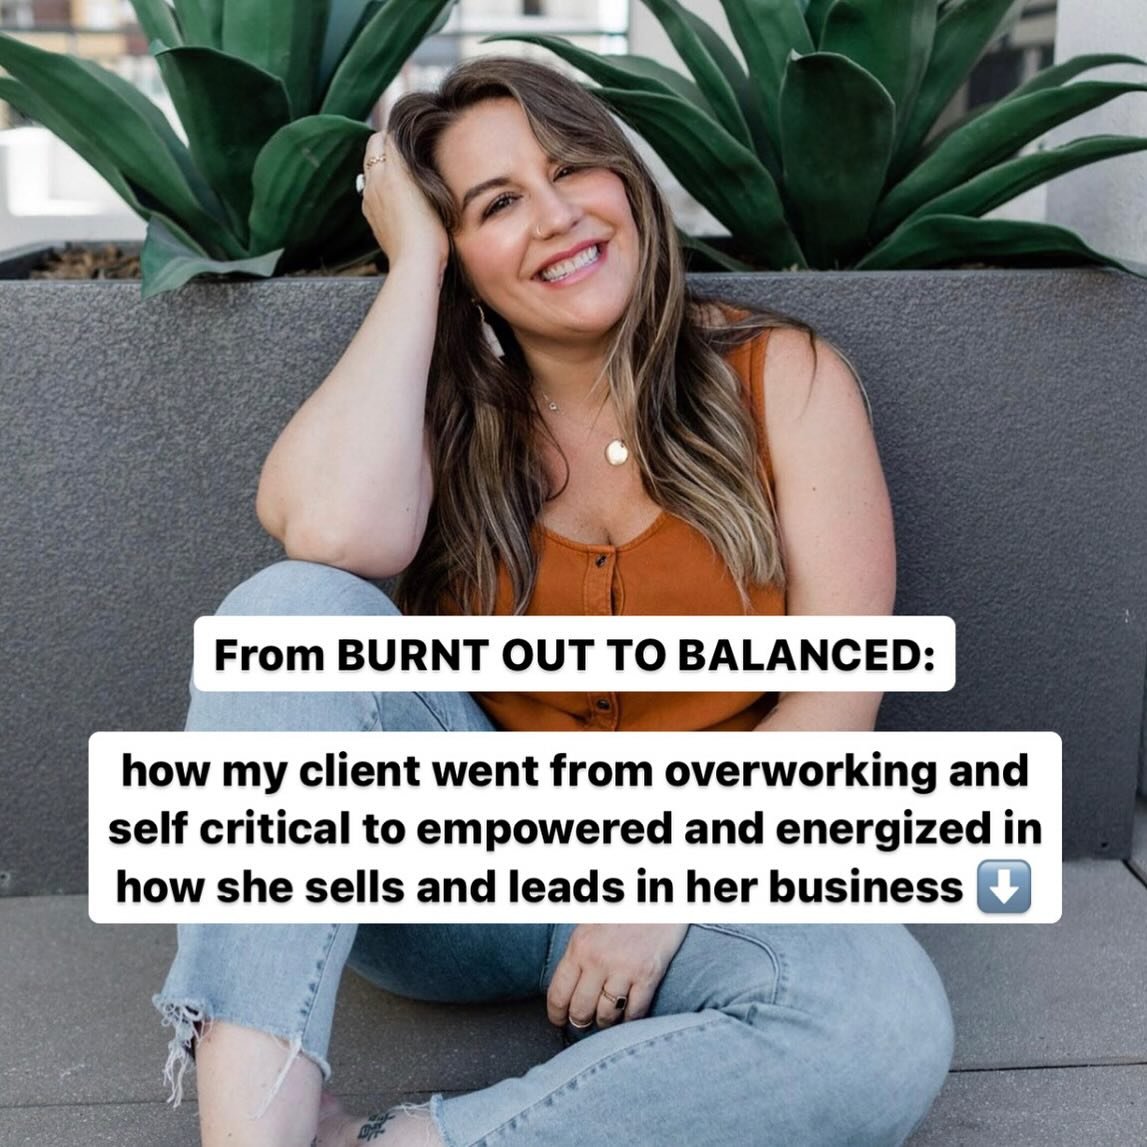 From BURNT OUT TO BALANCED: how my client went from overworking and self critical to empowered and energized in how she sells and leads in her business.

Background: My client came to me with big mental blocks from childhood that were unconsciously r